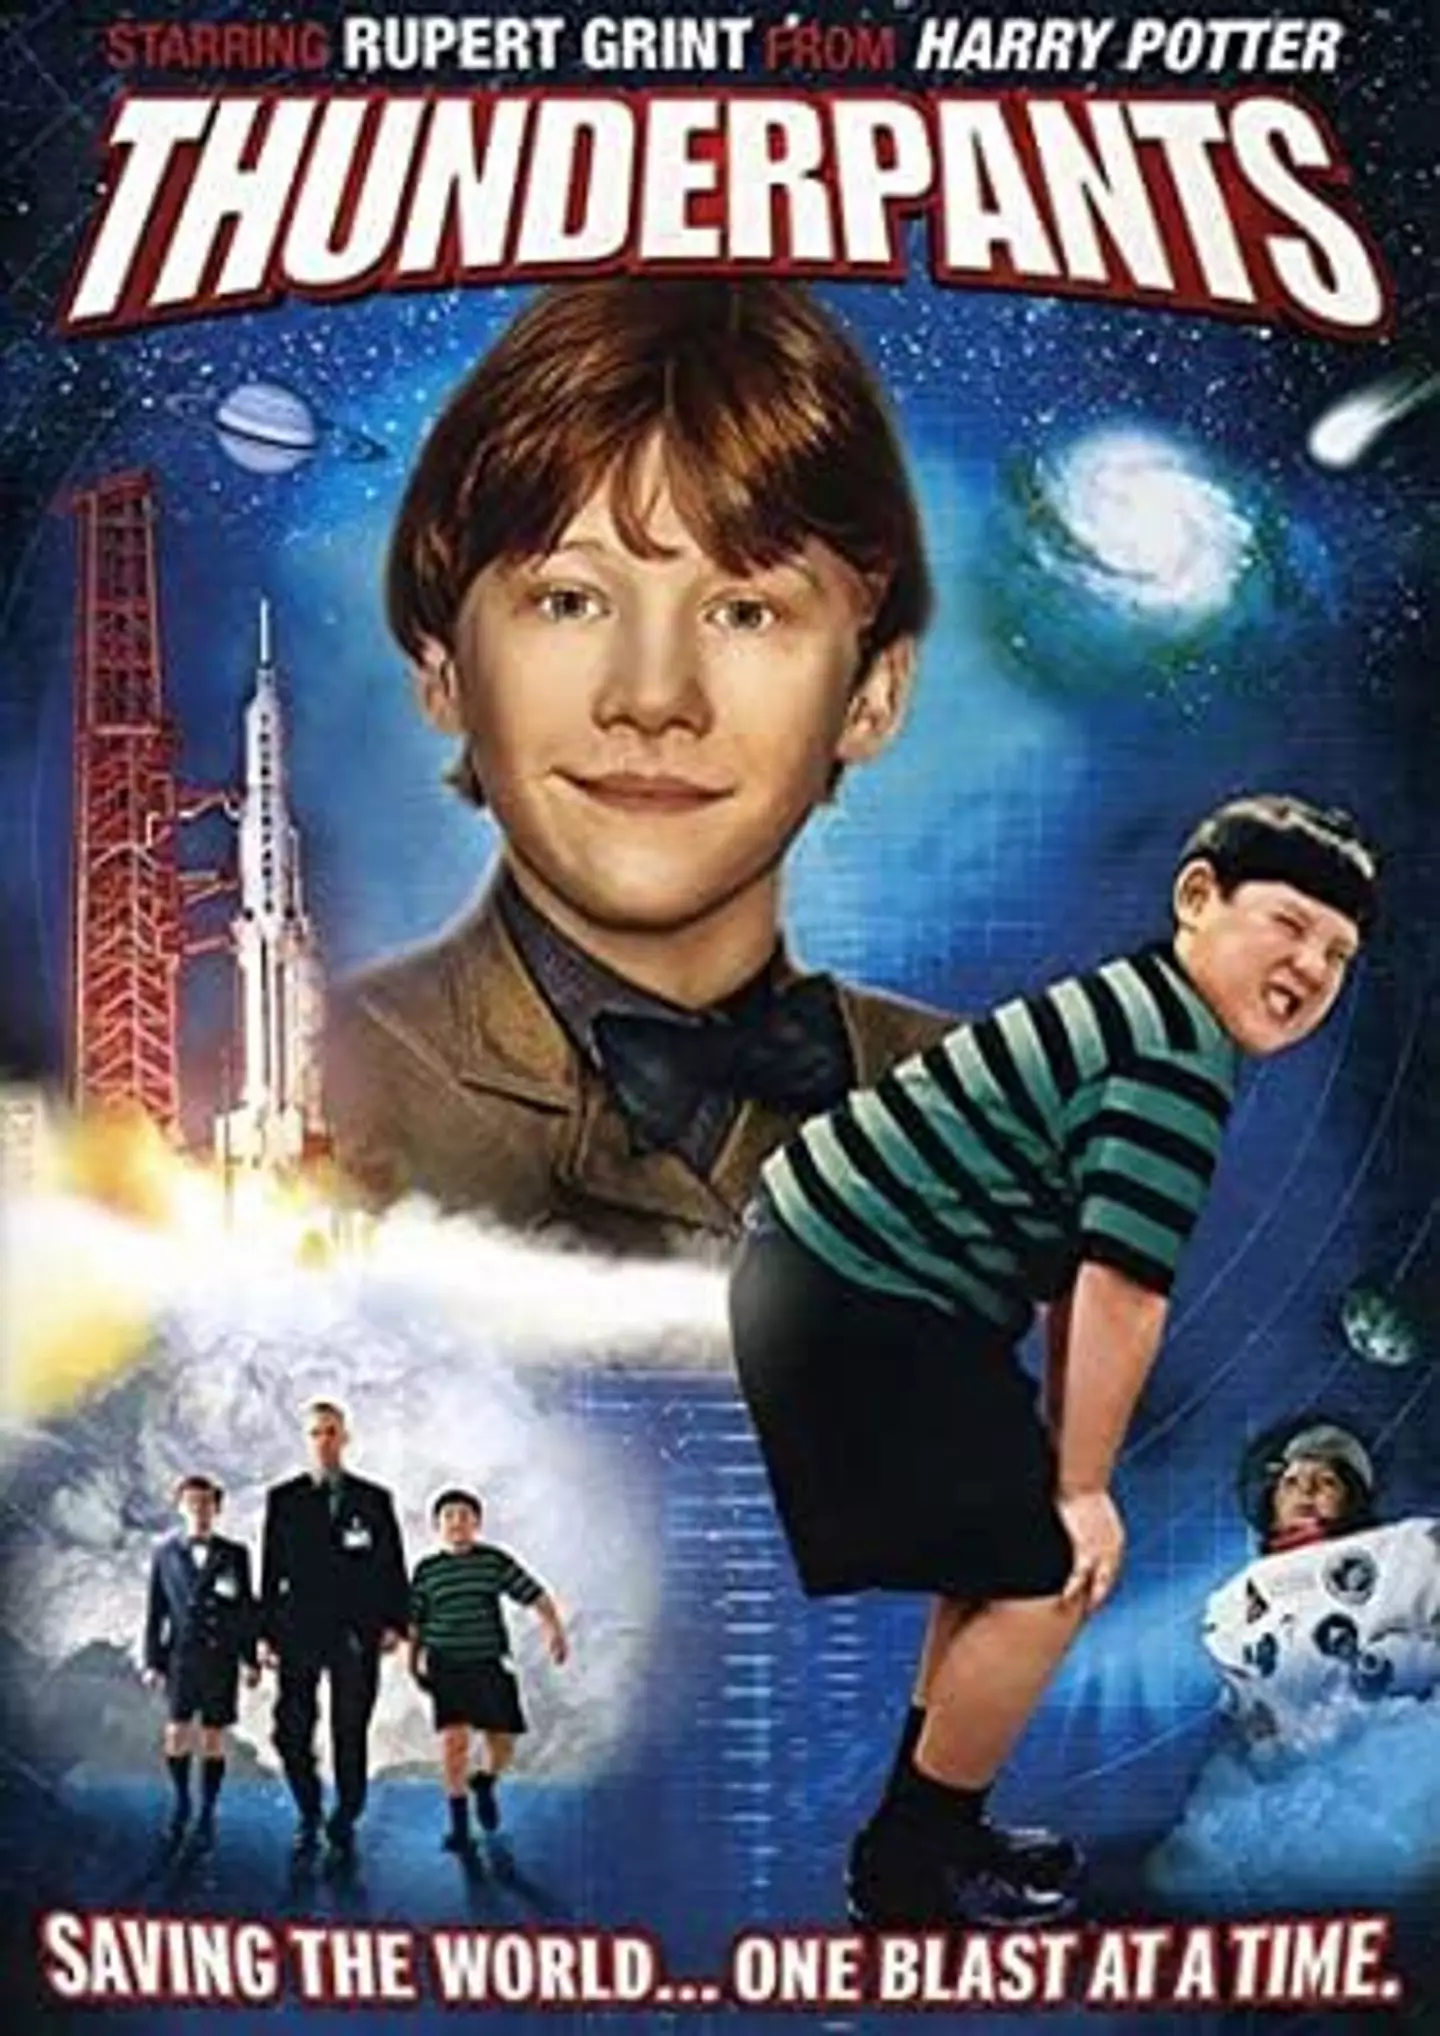 This movie really wanted to make bank on Rupert Grint having been in Harry Potter. (Pathé)